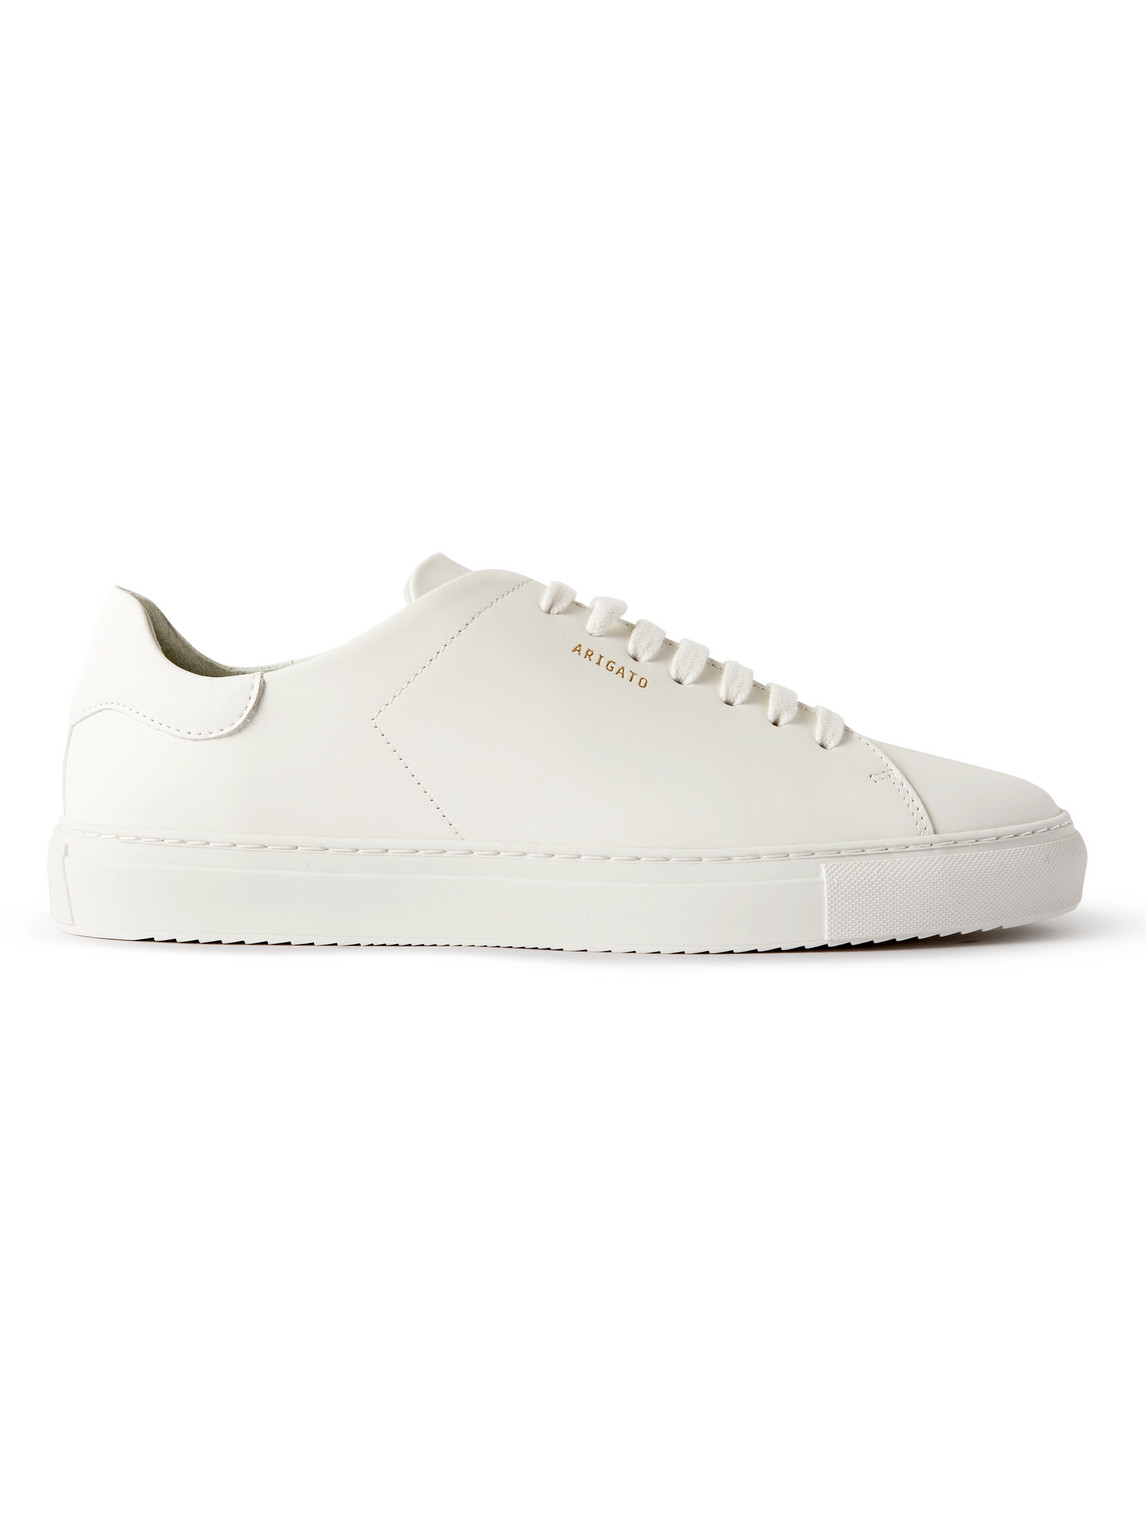 Axel Arigato Clean 90 Leather Trainers In White